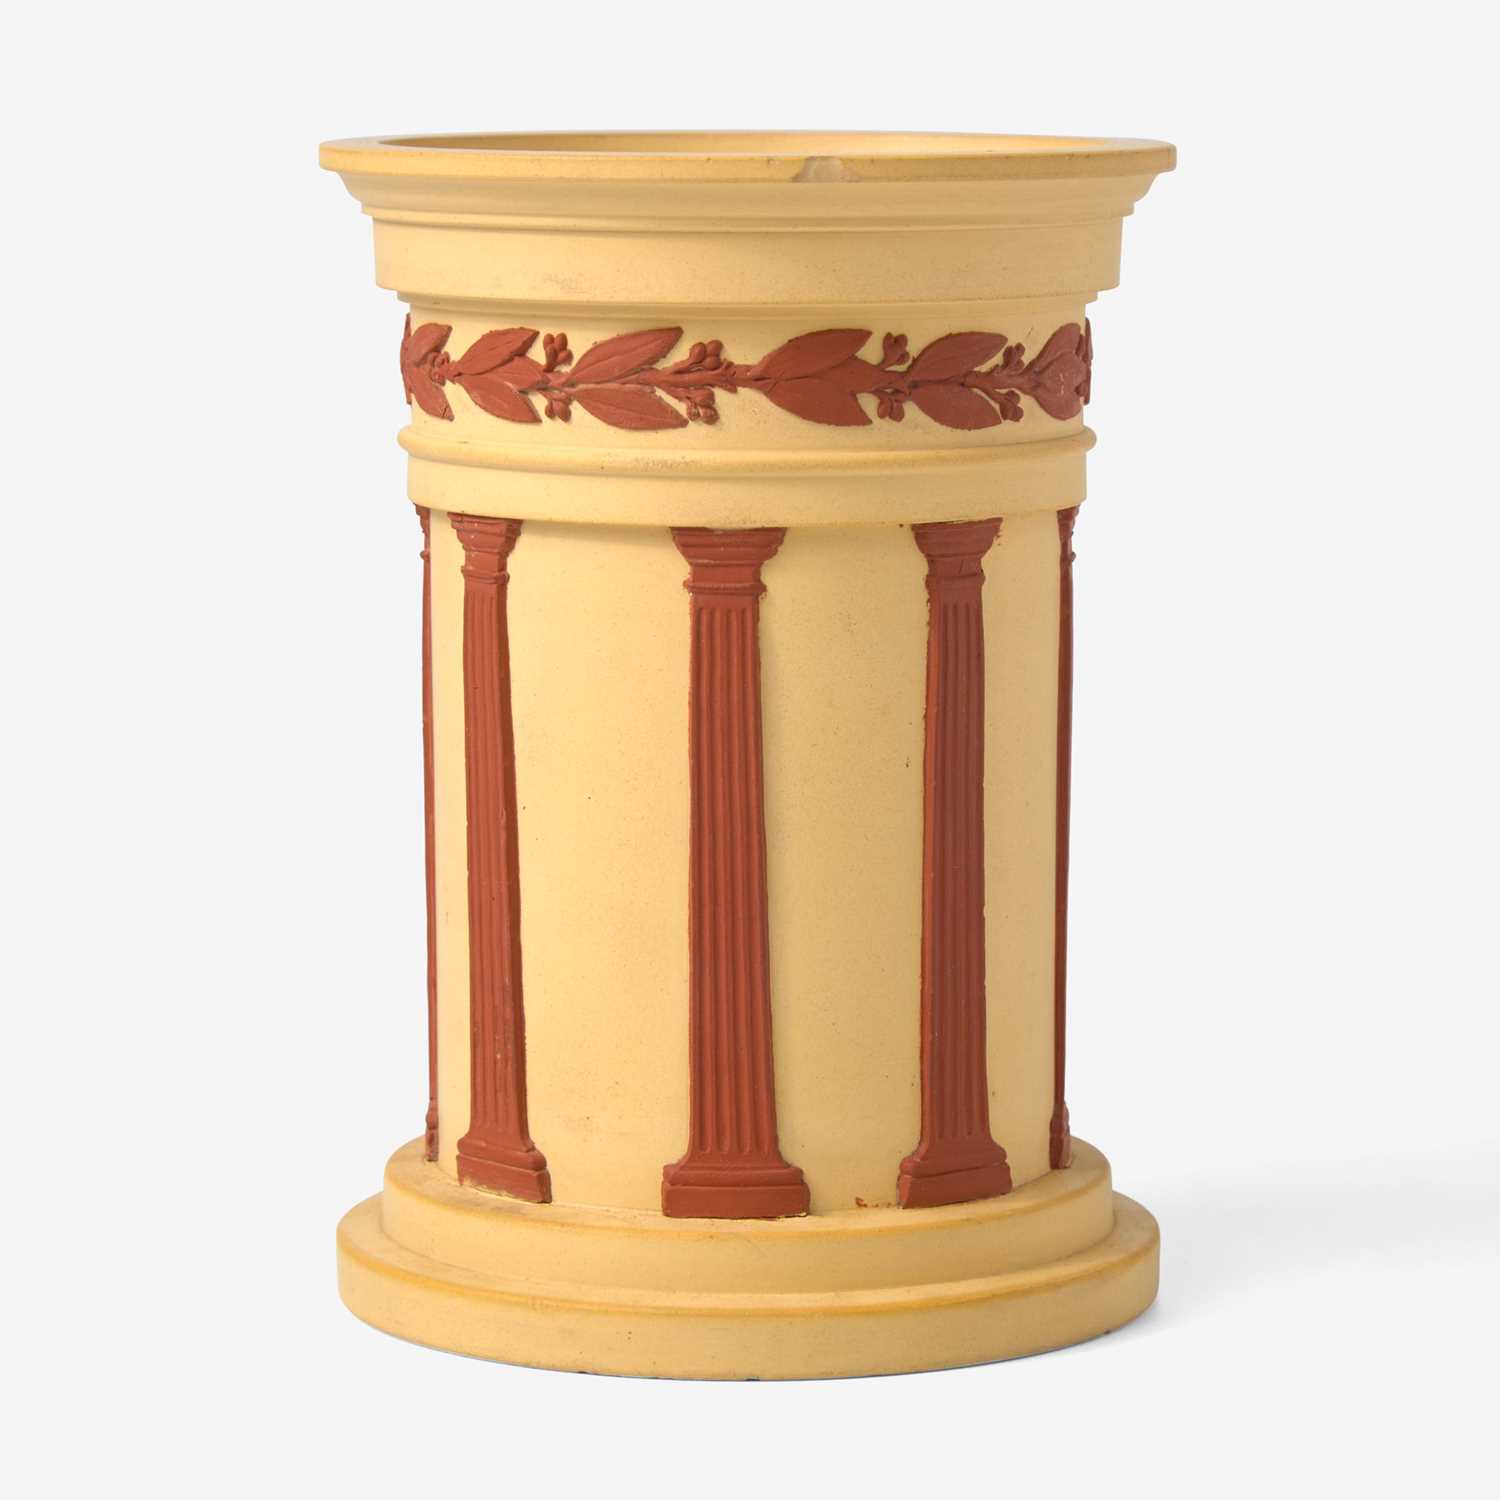 Lot 16 - A Wedgwood Rosso Antico-Decorated Caneware Column-Form Base